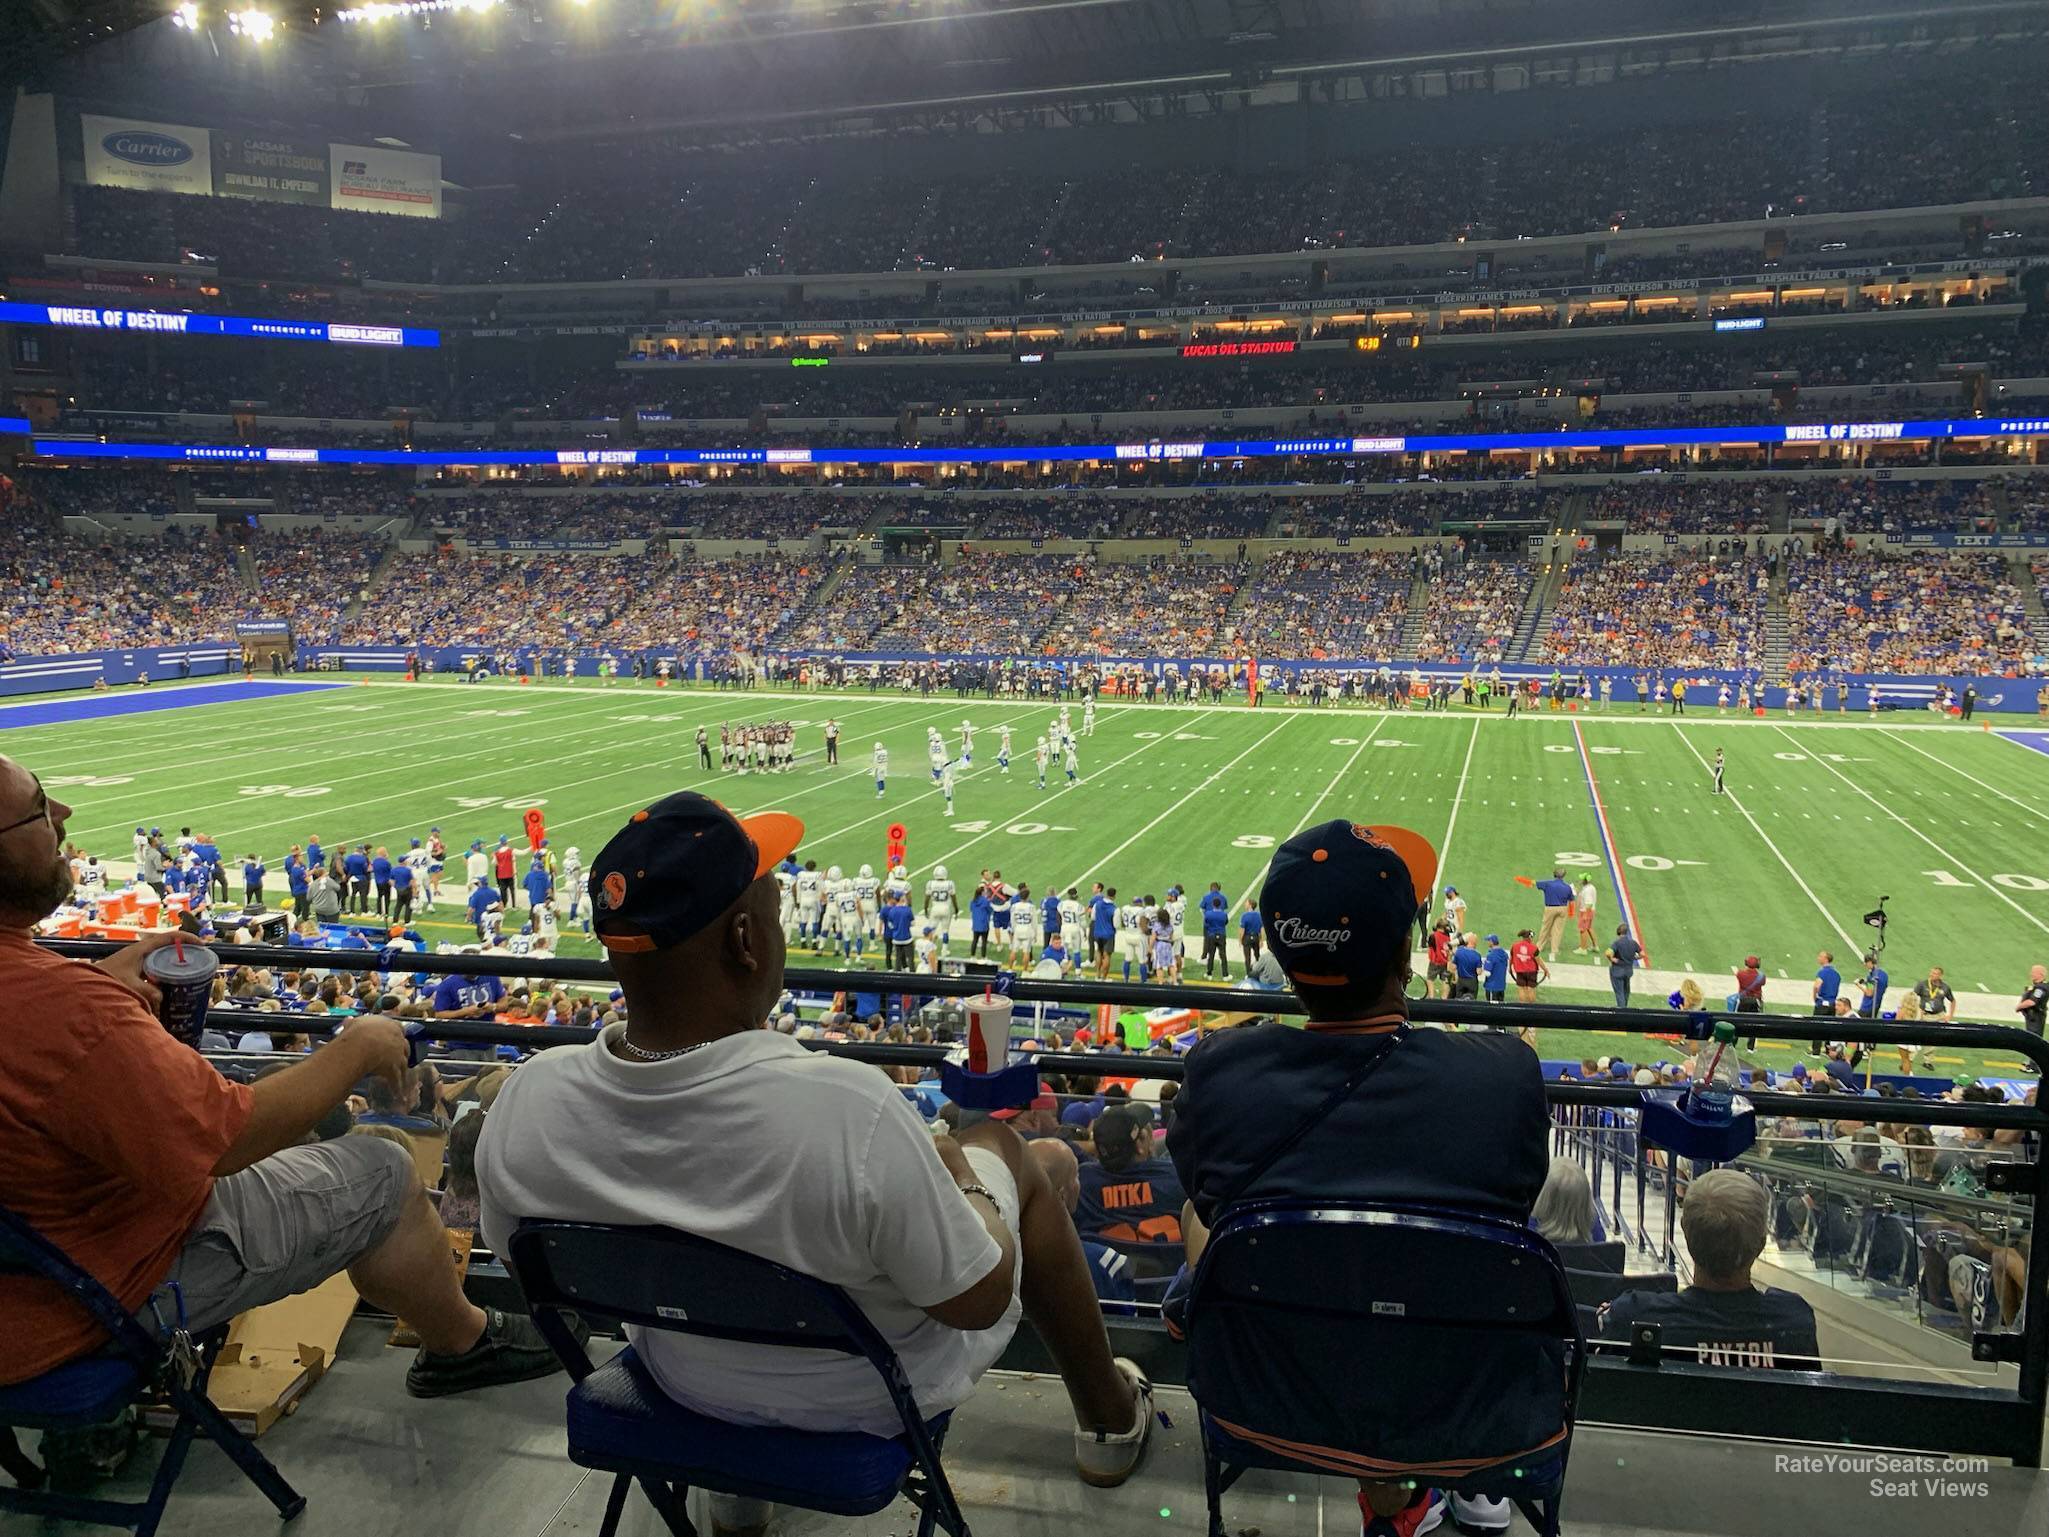 section 138, row 24w seat view  for football - lucas oil stadium